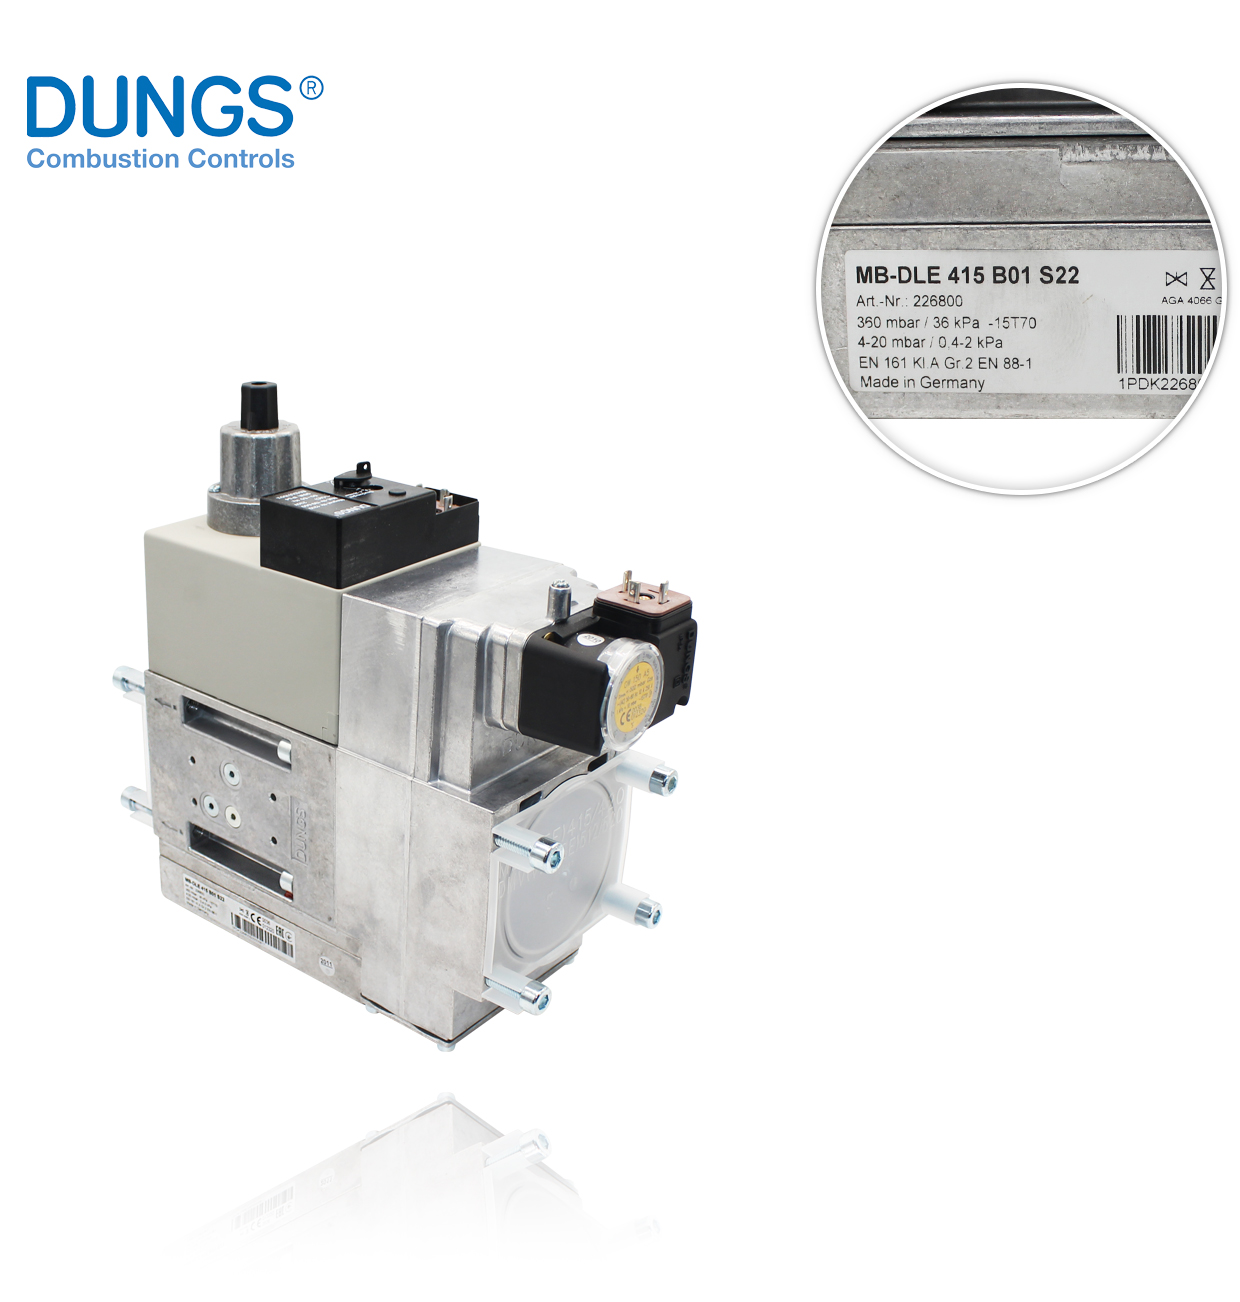 MB-DLE 415 B01 S22  AC230V con GW MULTIBLOC DUNGS 226800